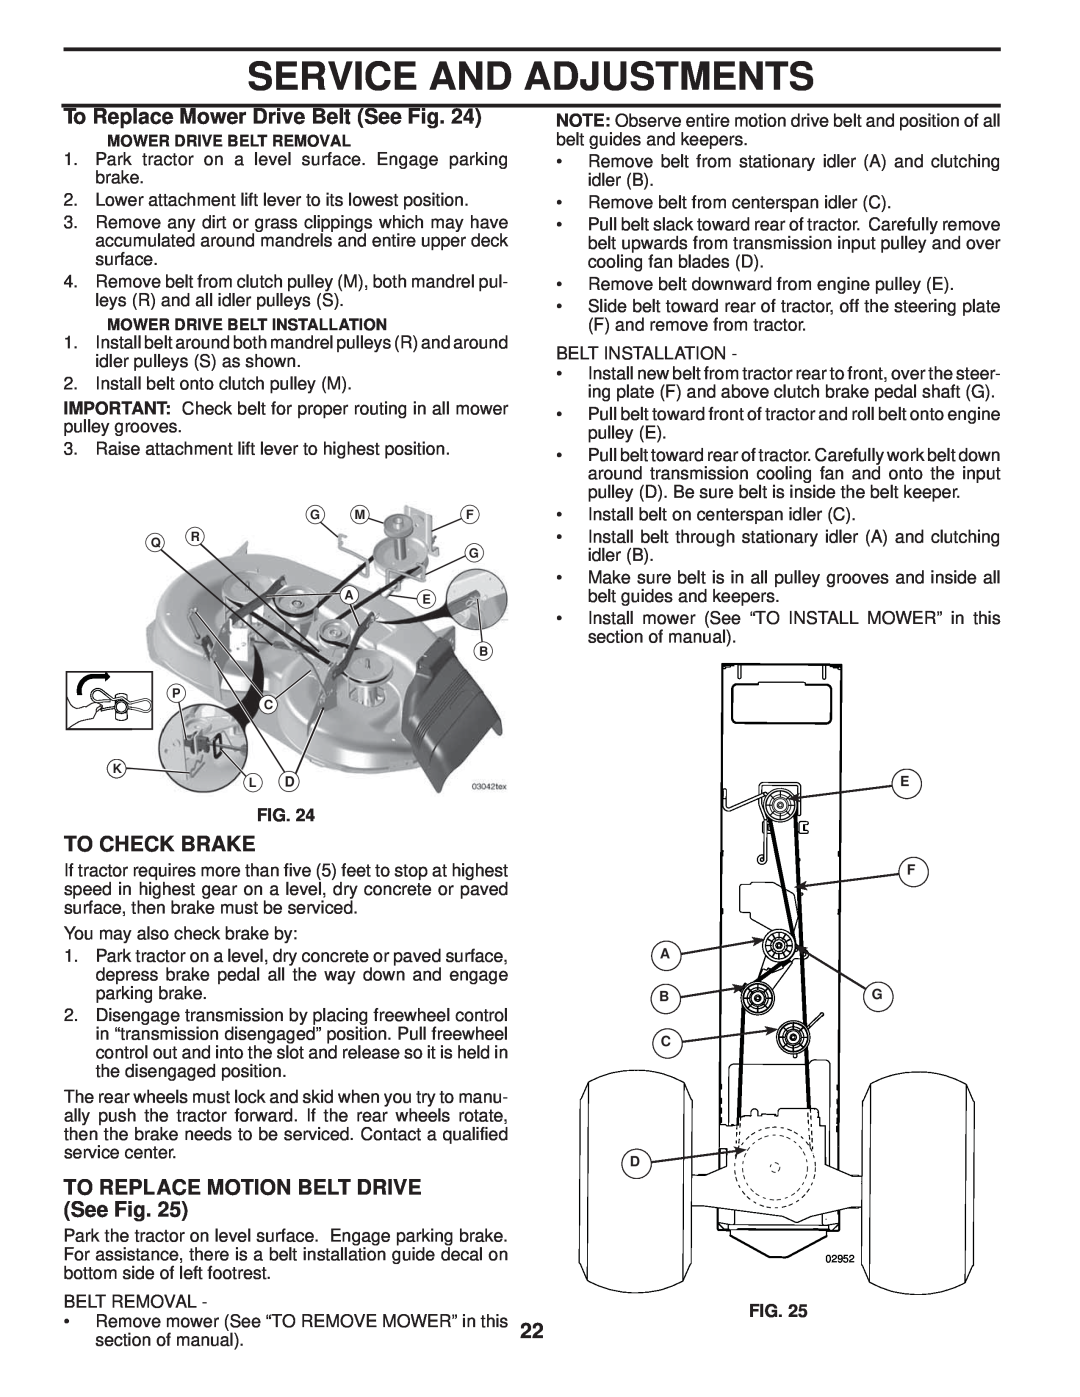 Poulan 411274, 96042004201 manual To Replace Mower Drive Belt See Fig, To Check Brake, TO REPLACE MOTION BELT DRIVE See Fig 